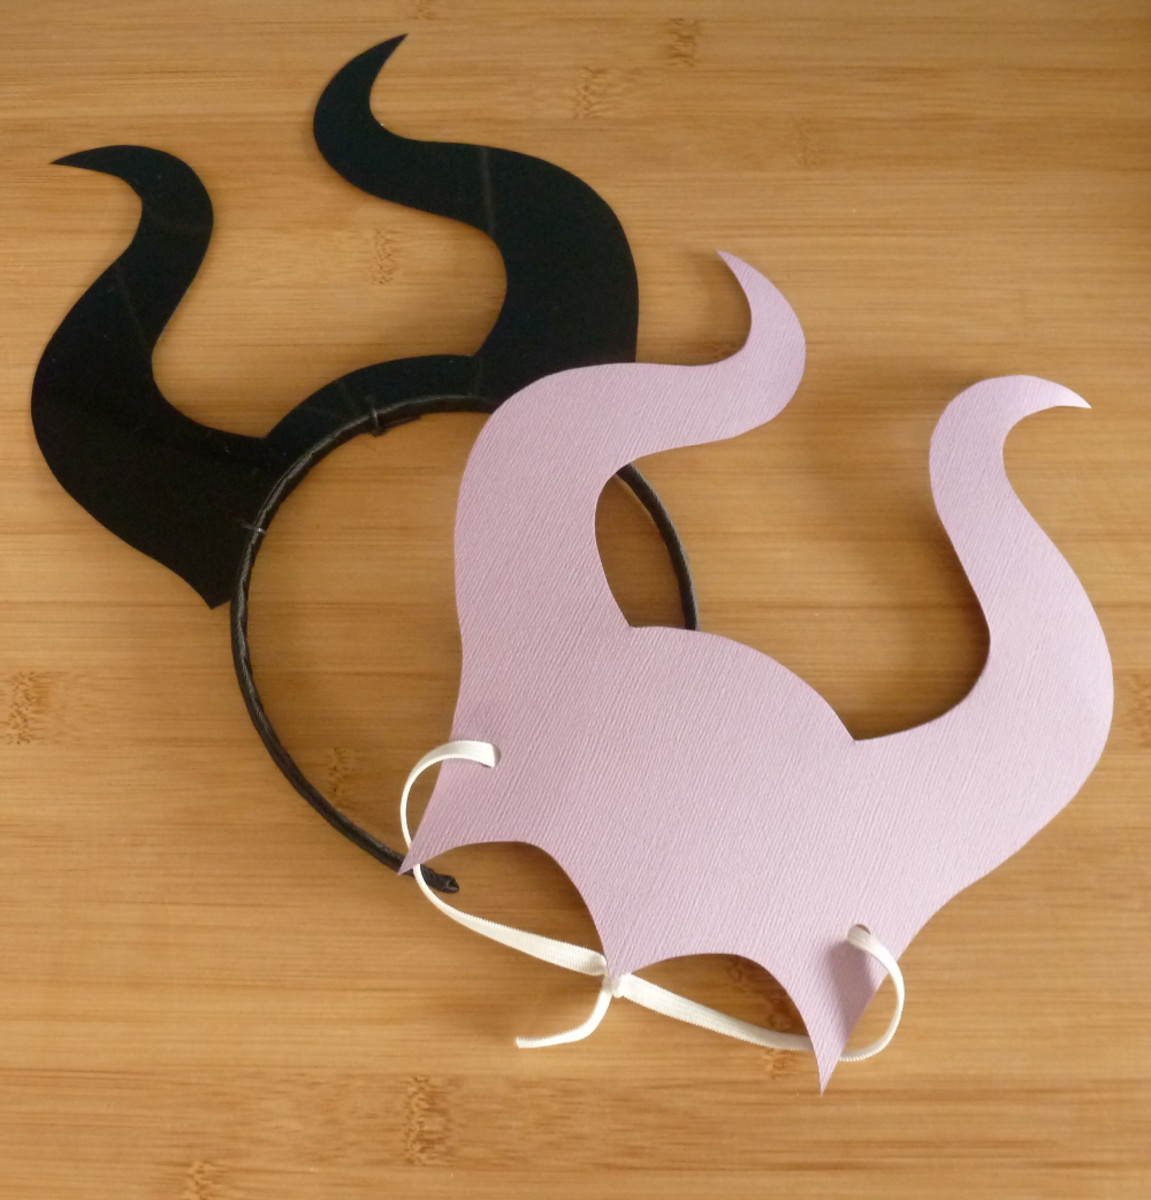 Ta Da! Here's two finished DIY headpiece costume accessories that Maleficent would be proud of.